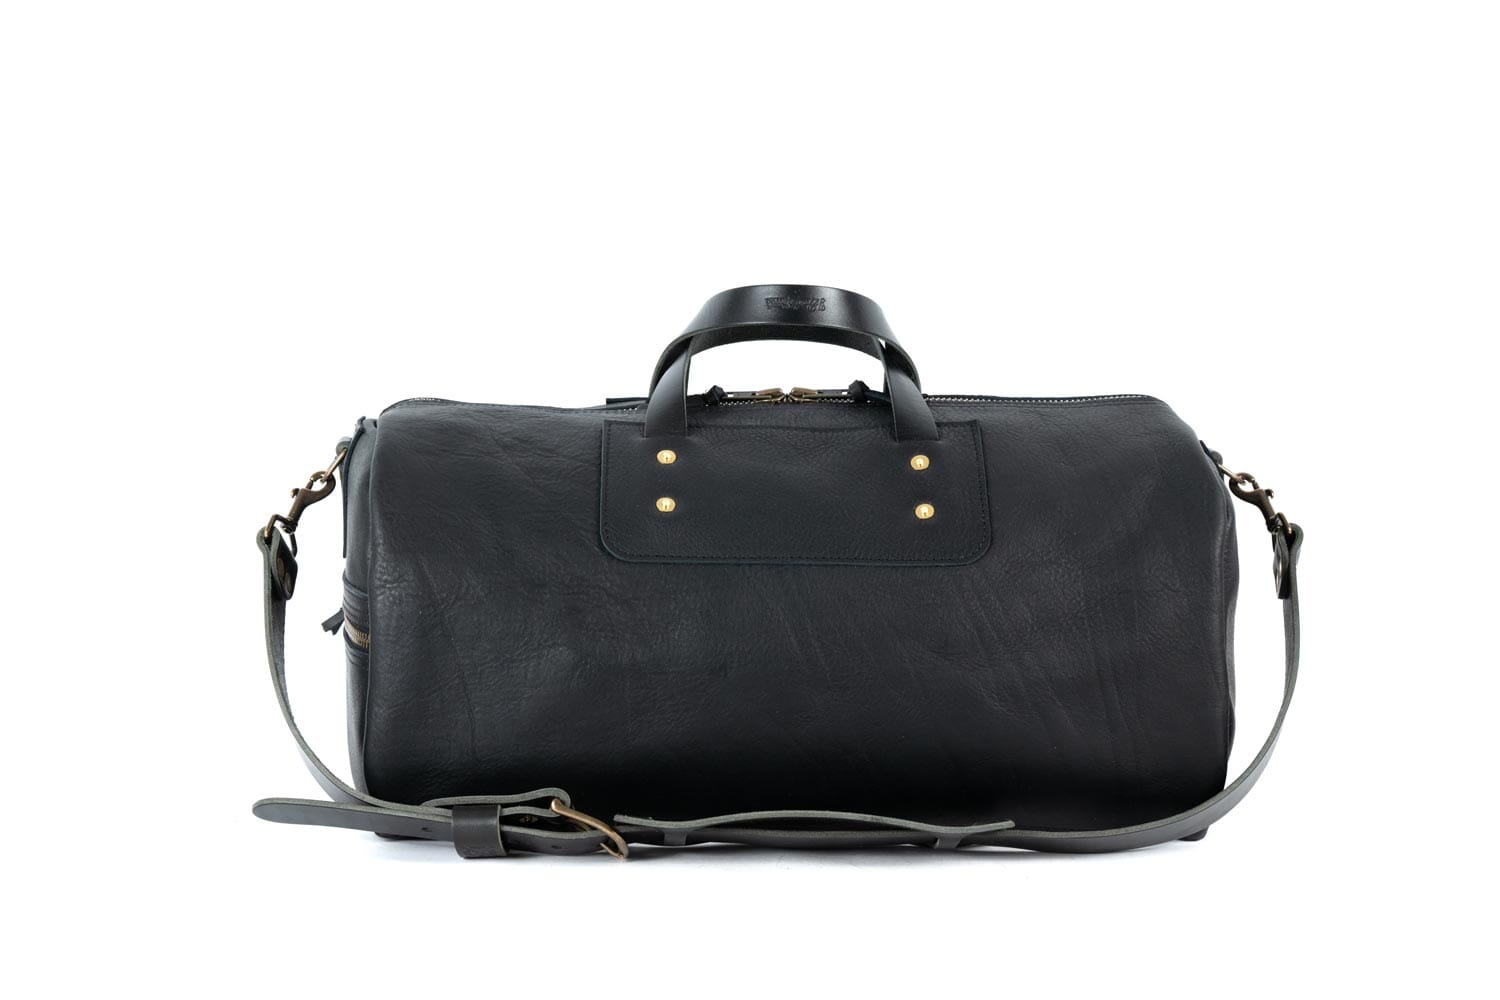 EXPEDITION LEATHER DUFFLE BAG - WEEKENDER - BLACK